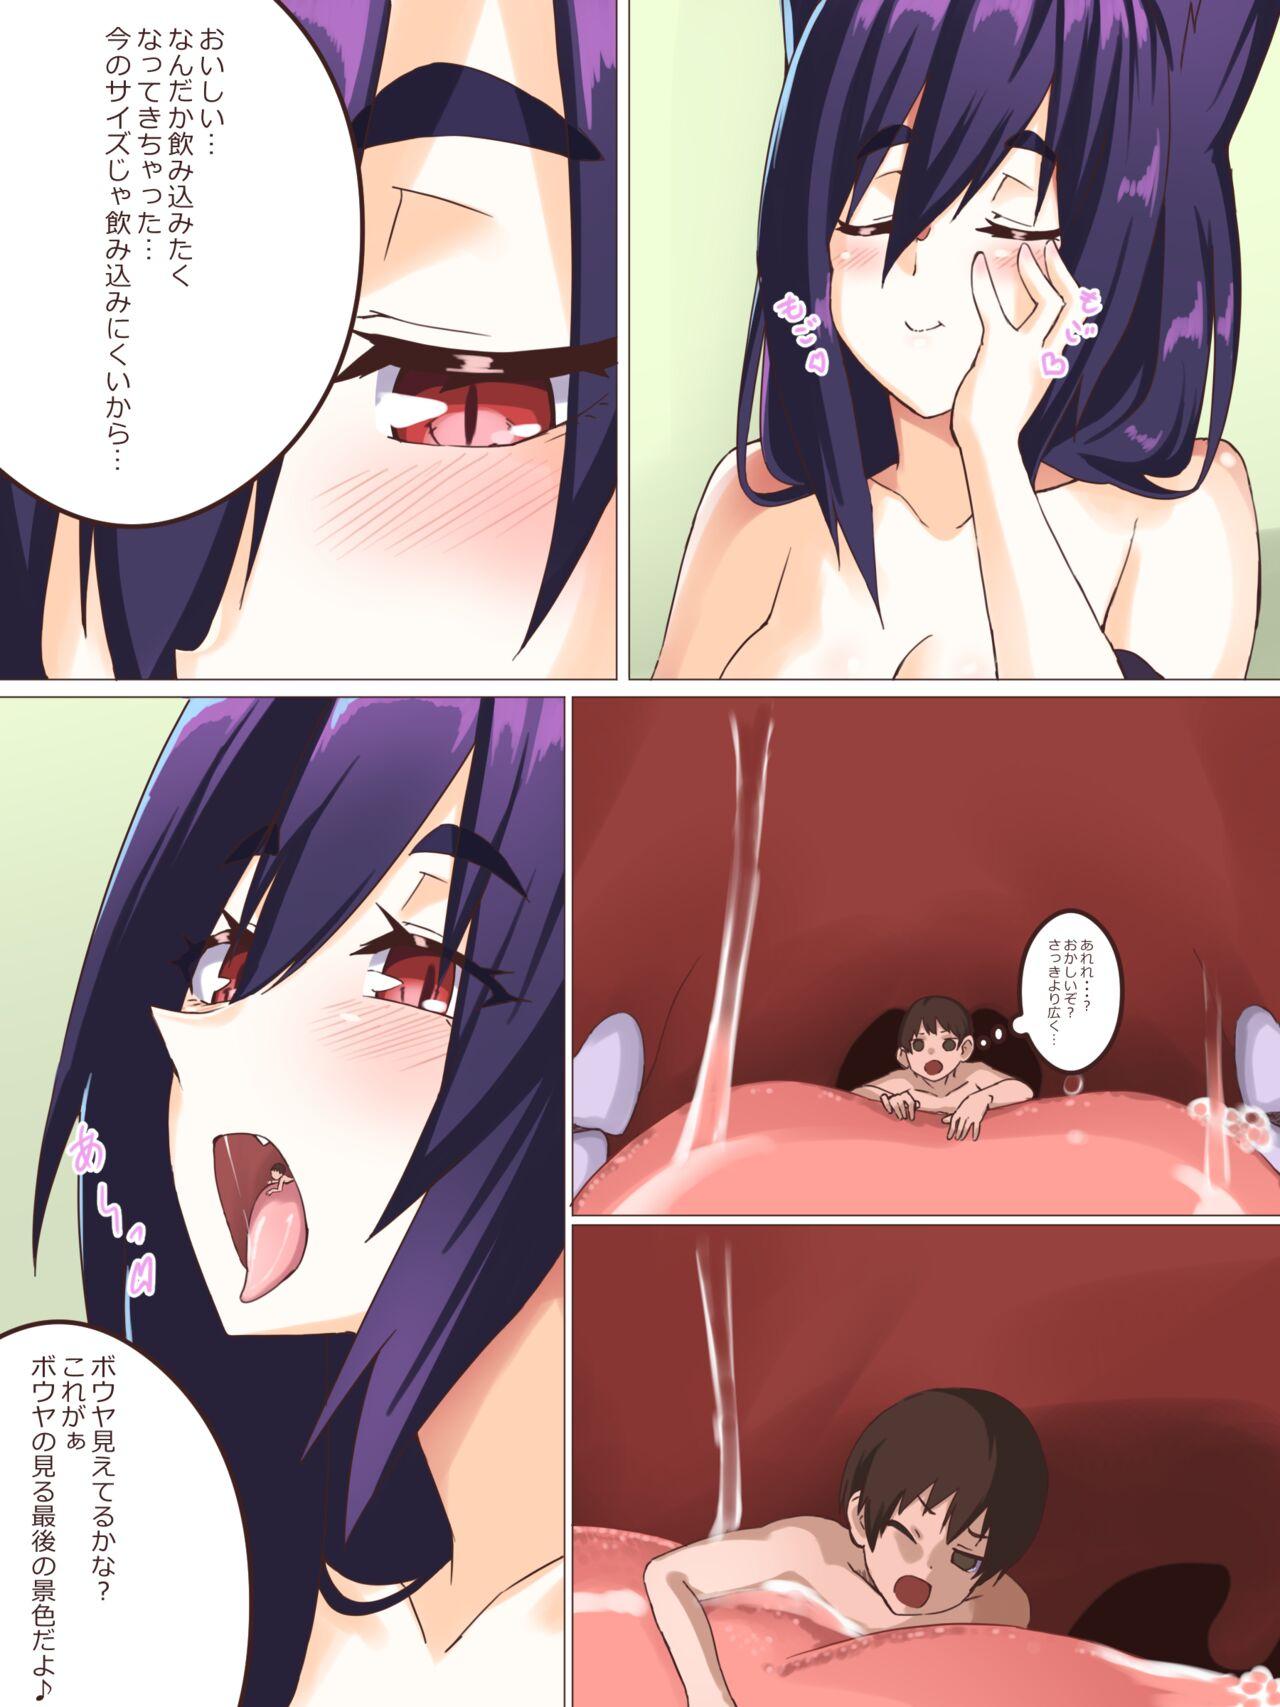 Ruiva Punished By The Fox Sister - Original Twerking - Page 10